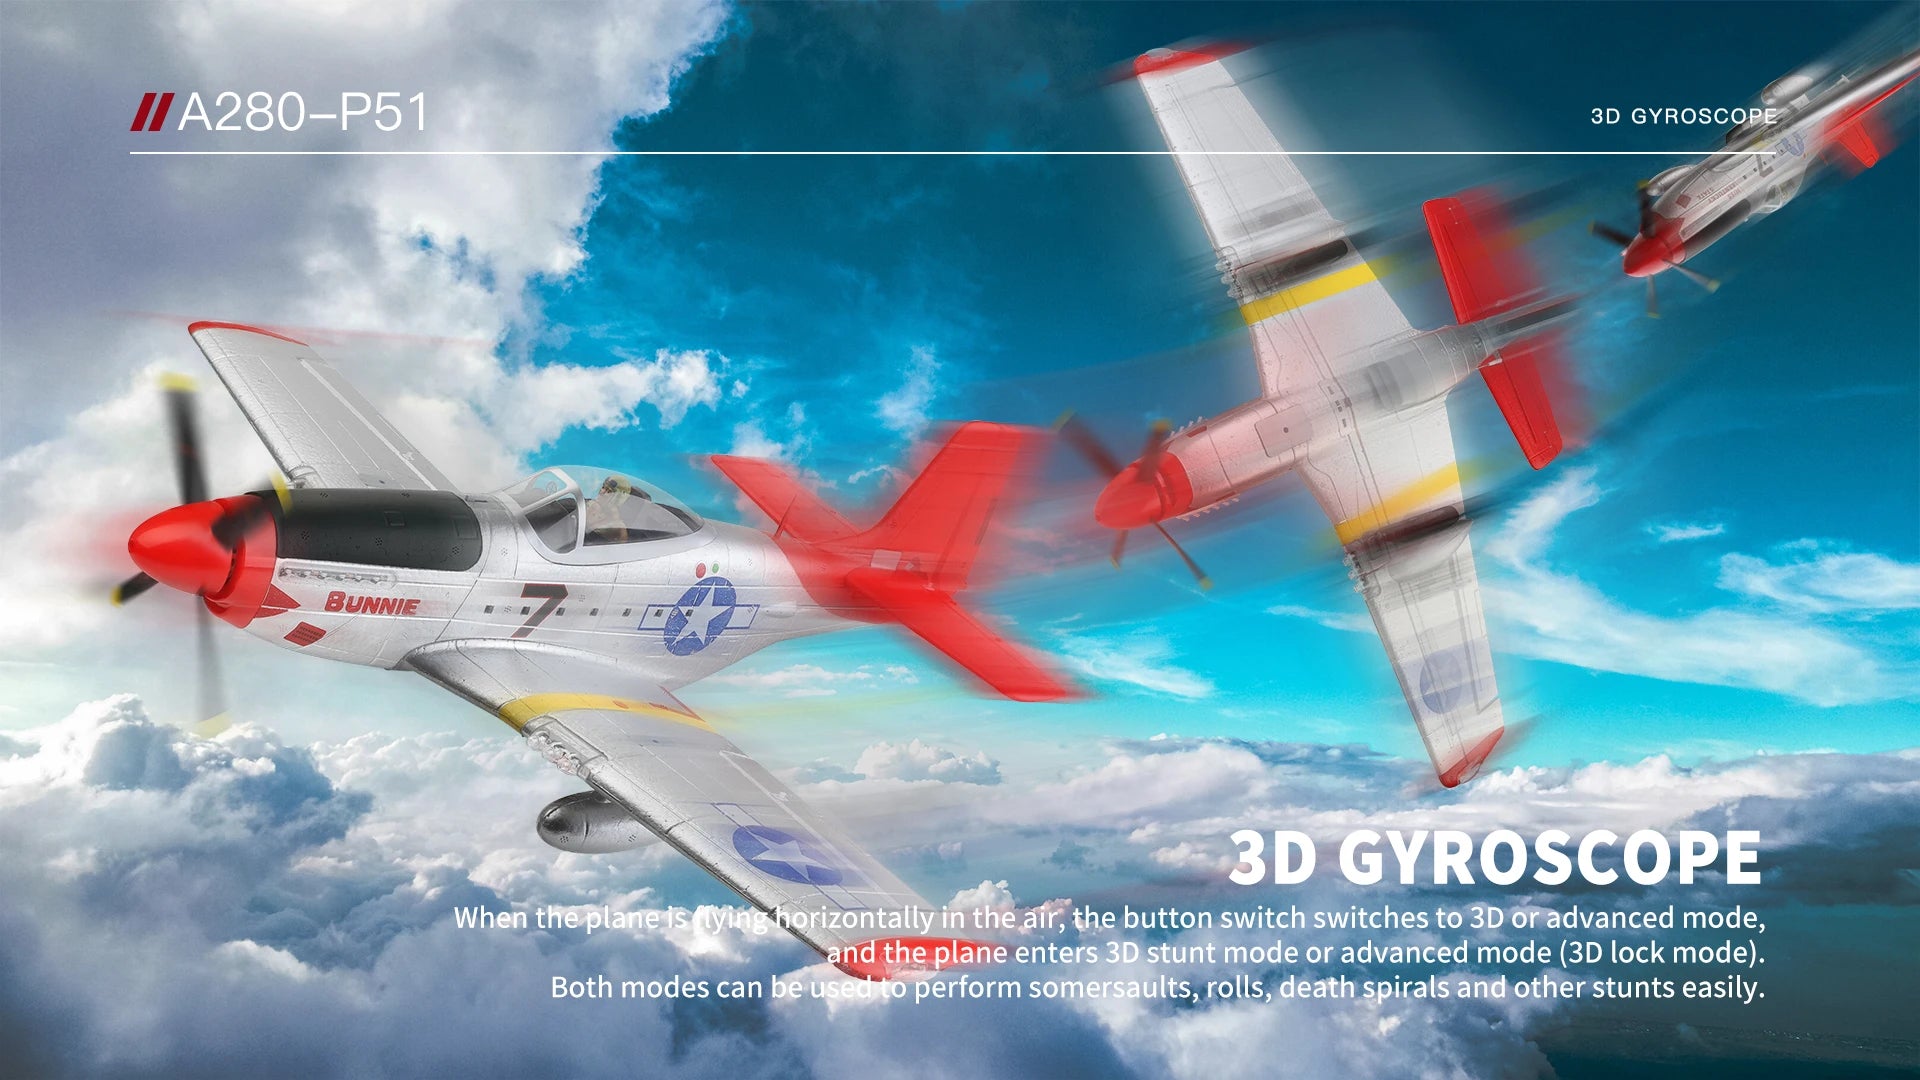 WLtoys A280 Brushless Motor RC Airplane, the button switch switches to 3D or advanced mode, and the plane enters 3D stunt